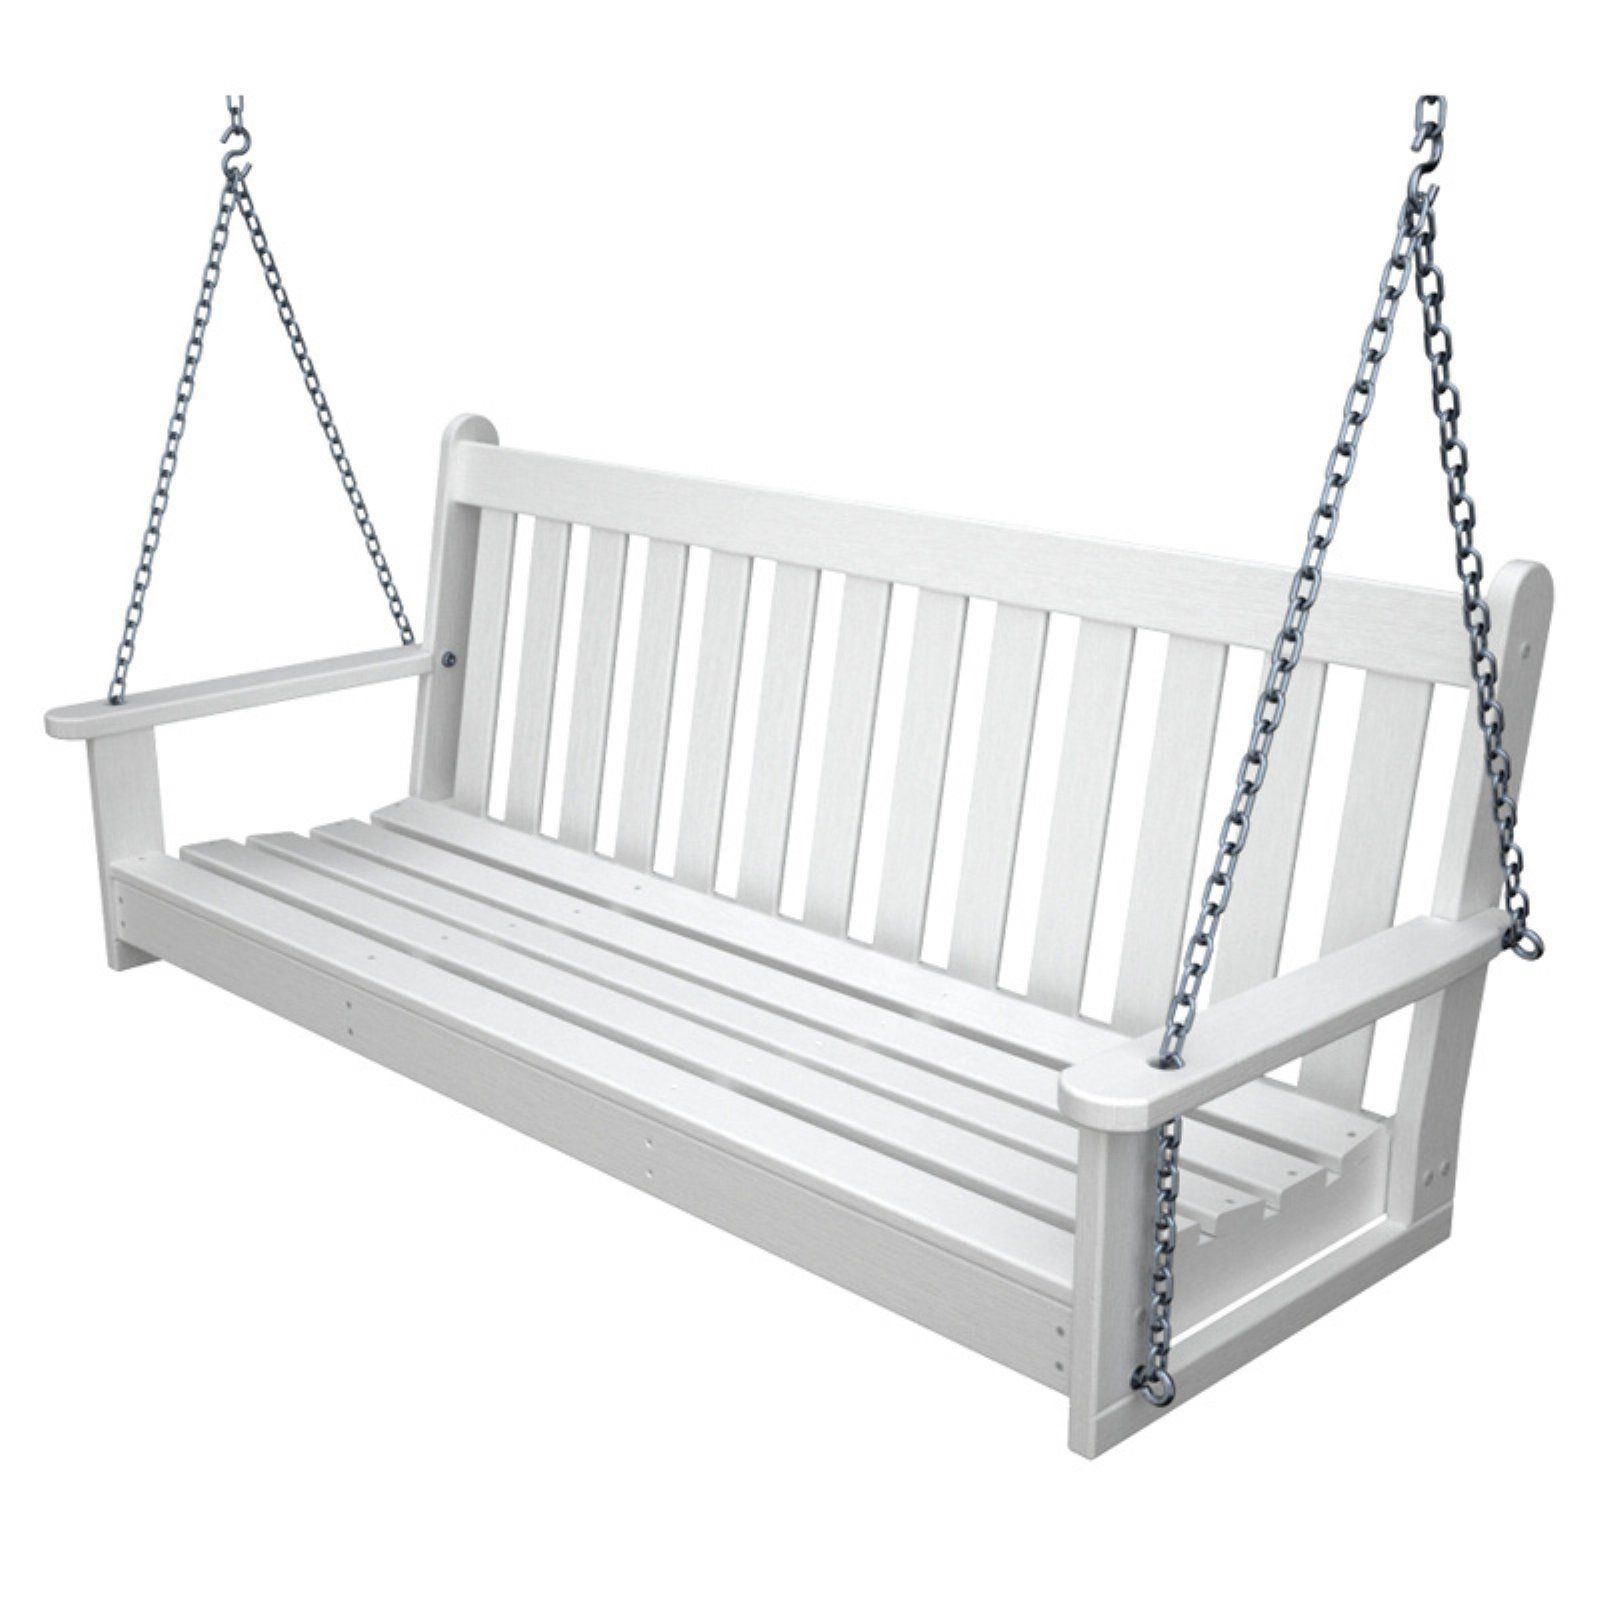 Polywoodâ® Vineyard Recycled Plastic 5 Ft. Porch Swing White Intended For Vineyard 2 Person Black Recycled Plastic Outdoor Swings (Photo 2 of 25)